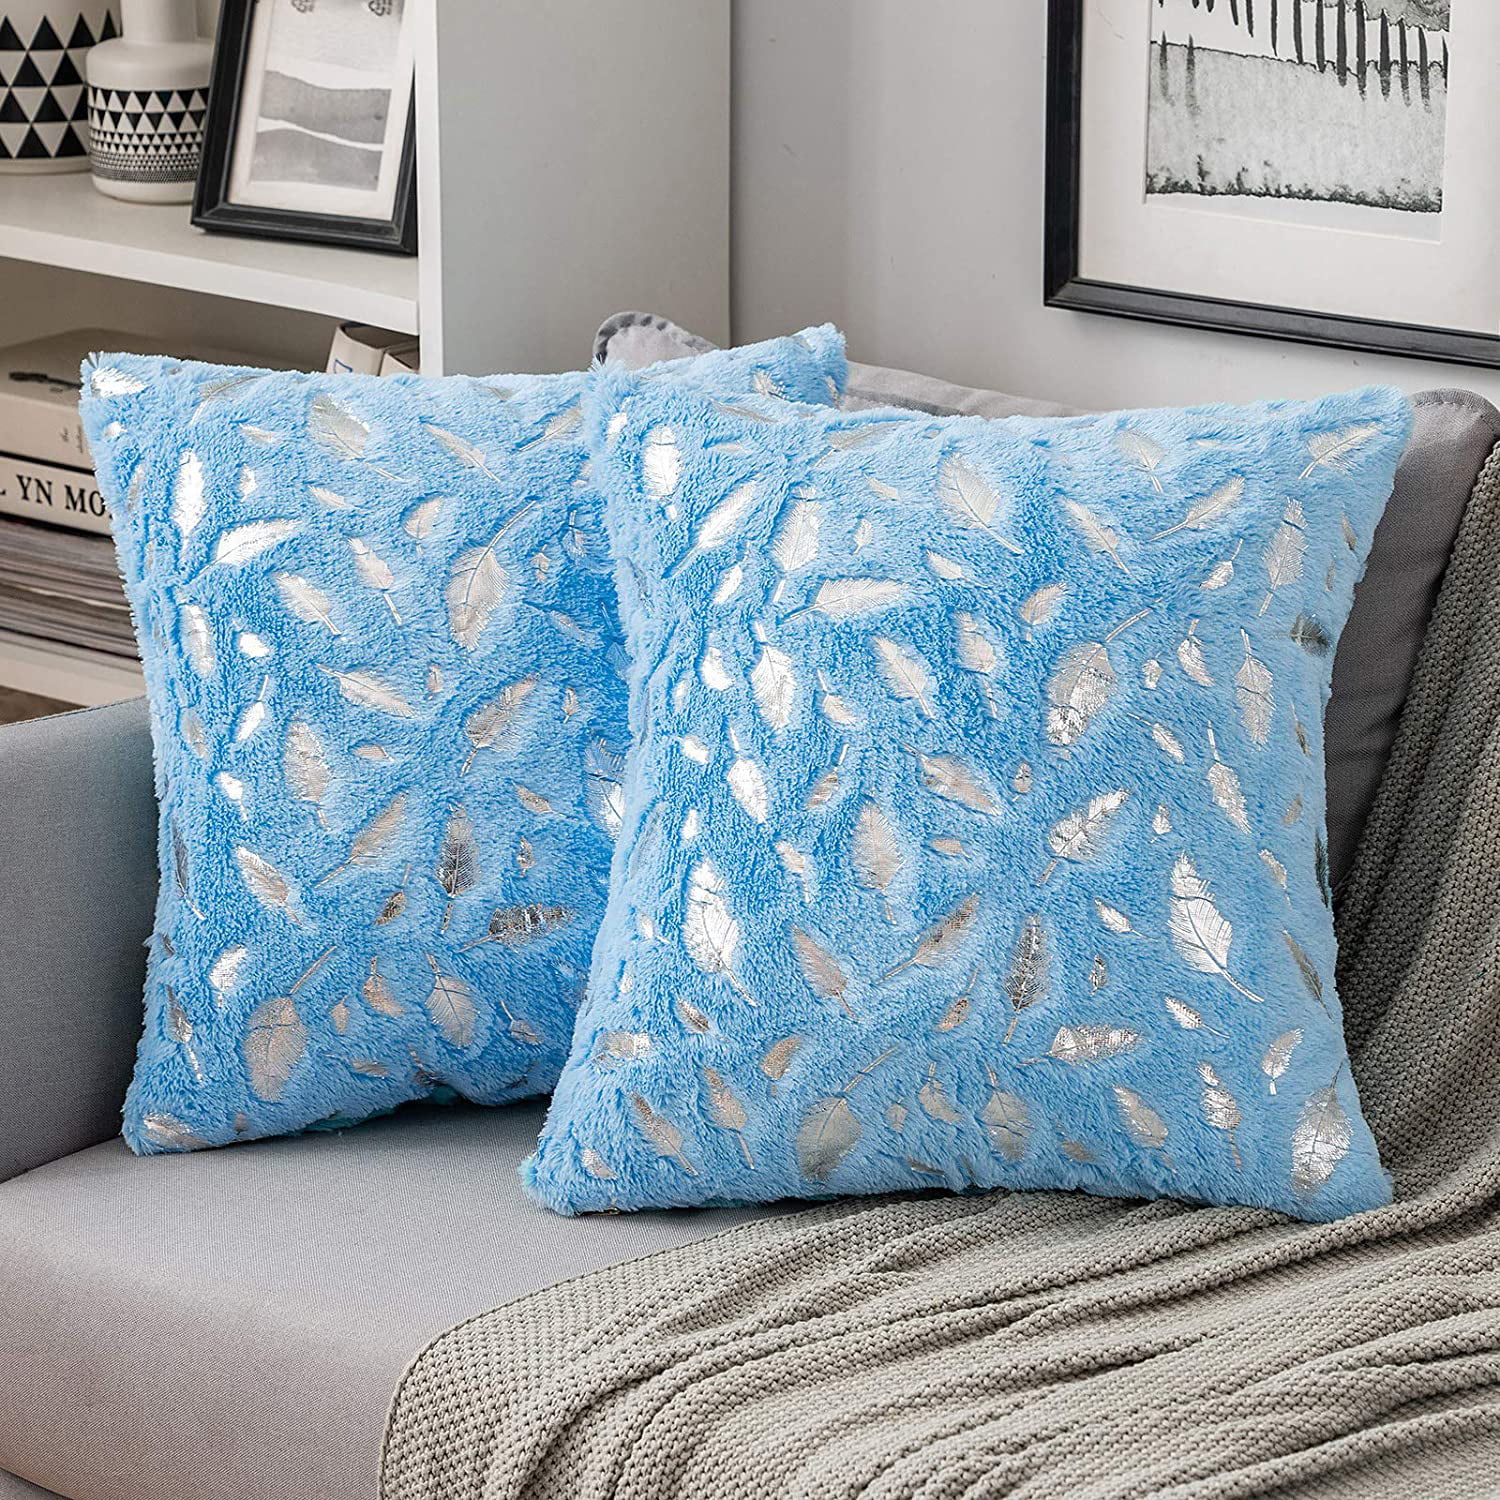 Silver Leaf Cushion Covers High Quality Material 18x18" 